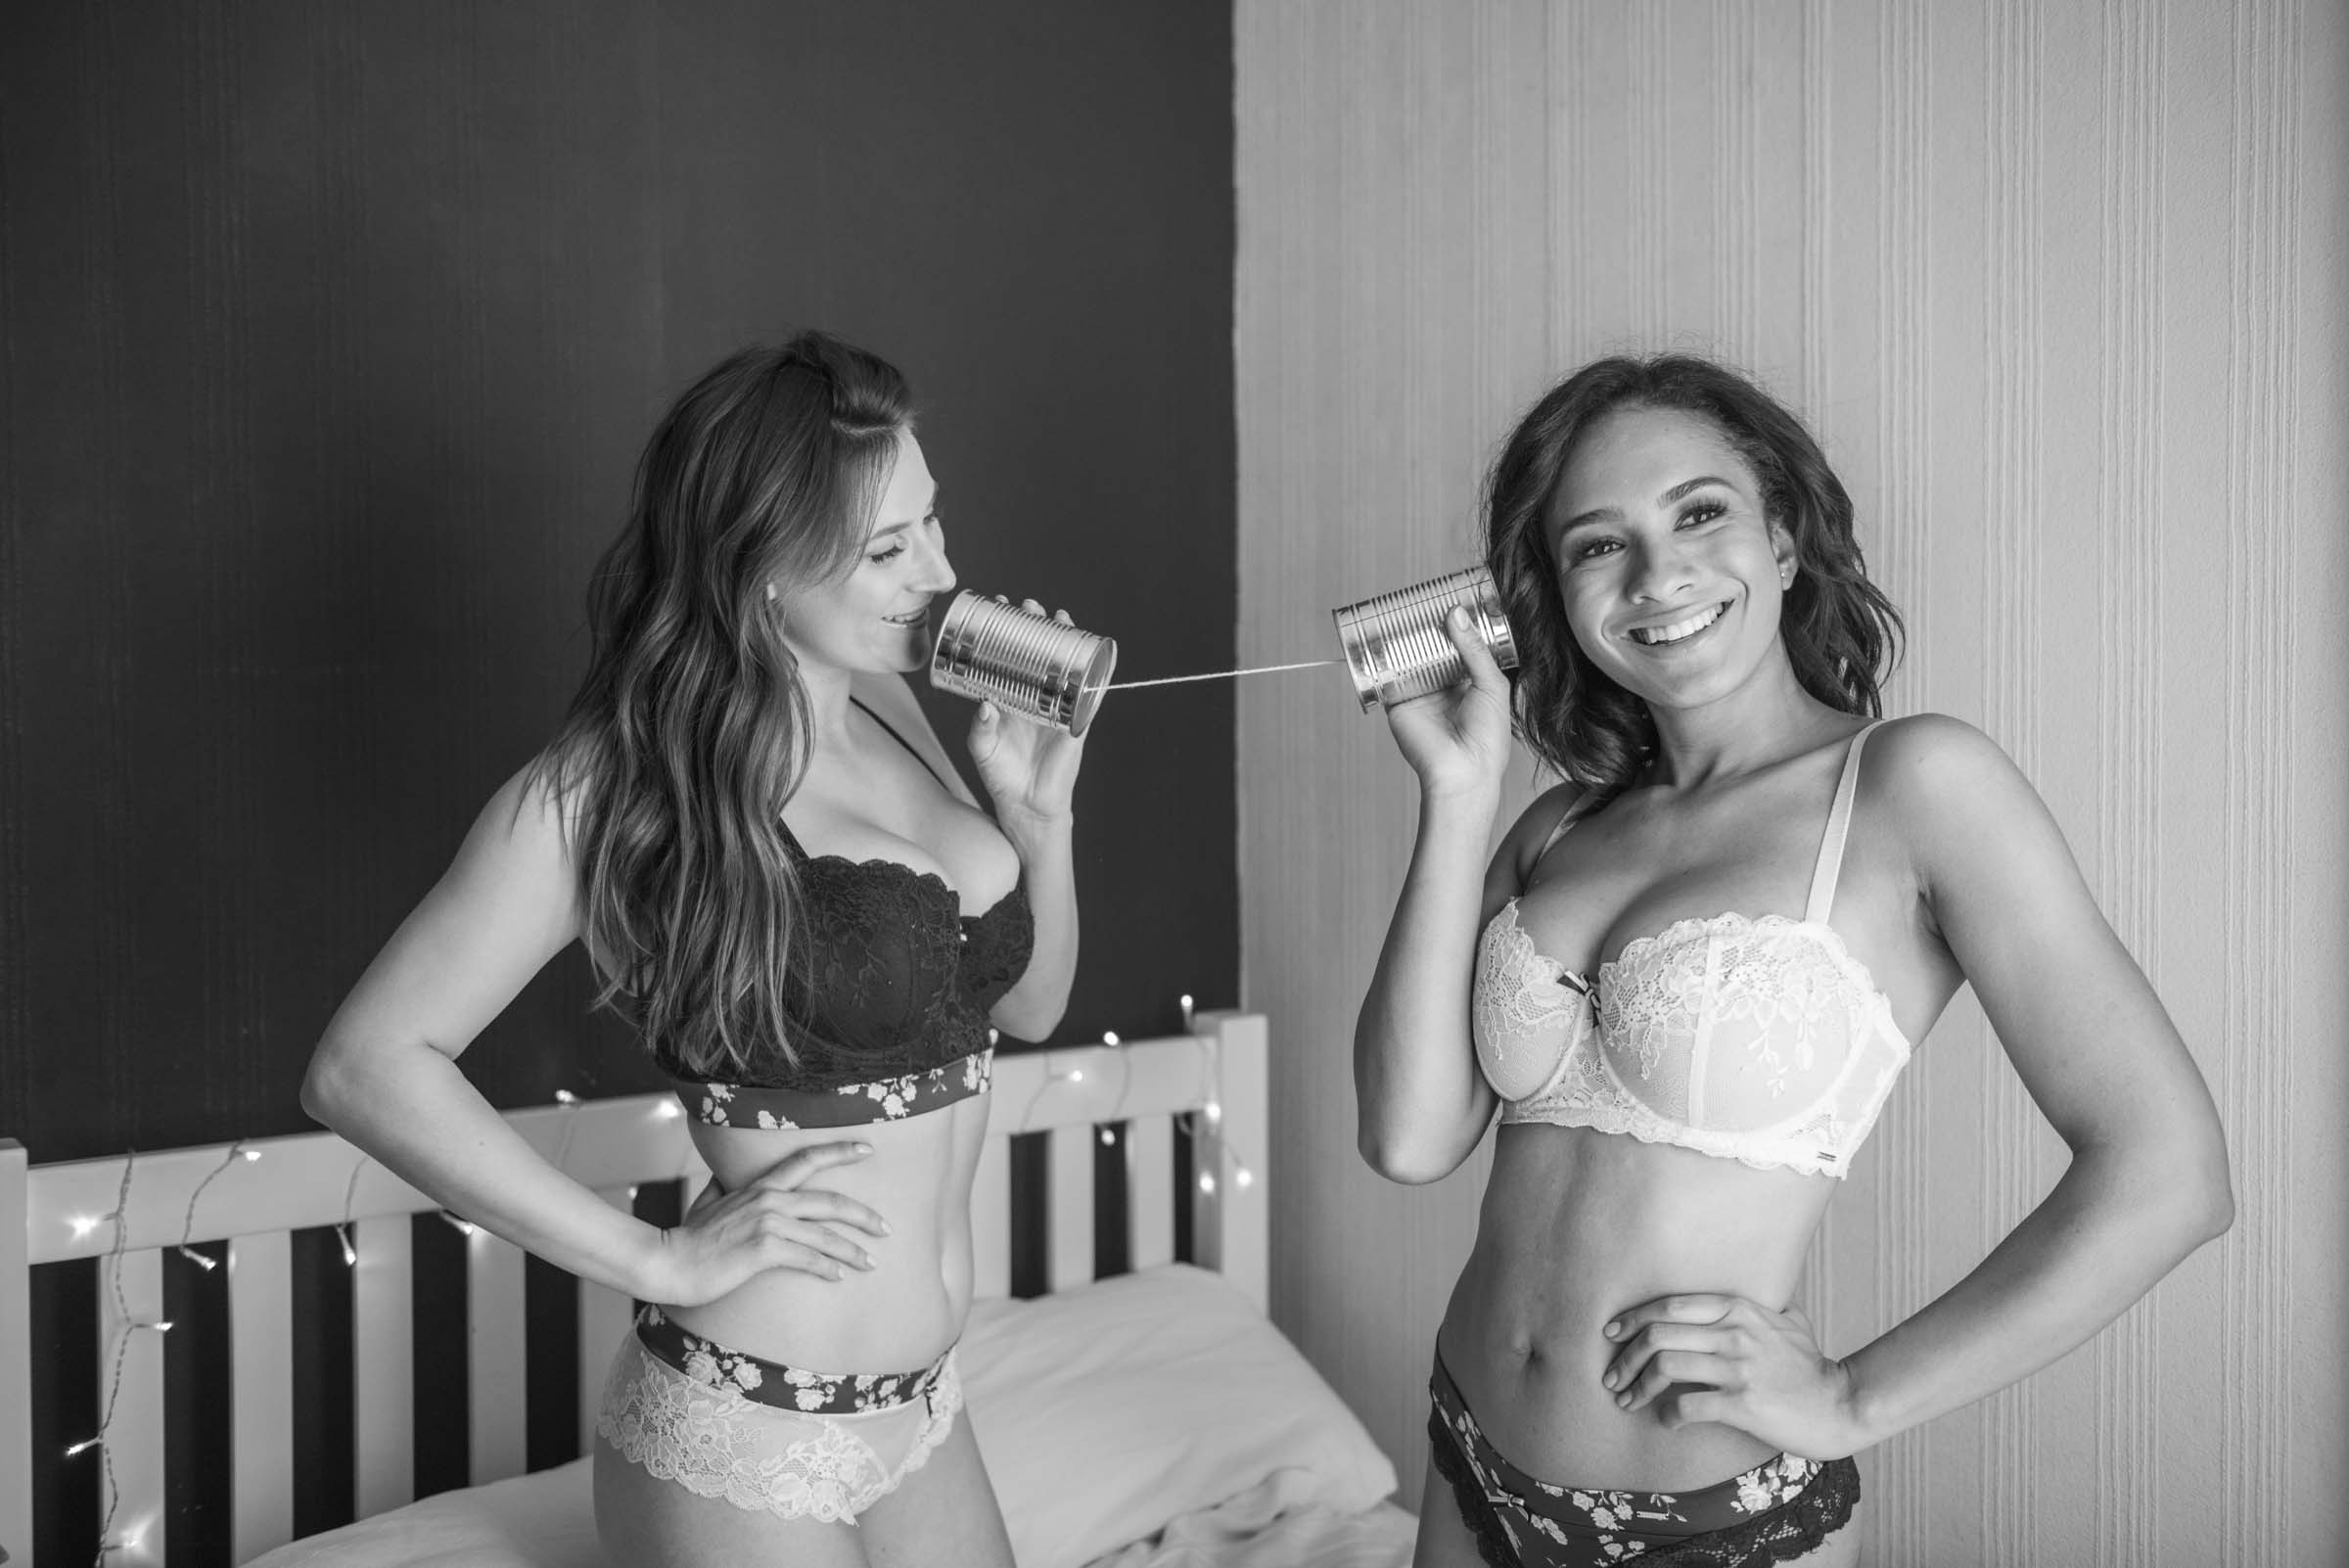 Attollo: the bra business pioneering lingerie for D+ women